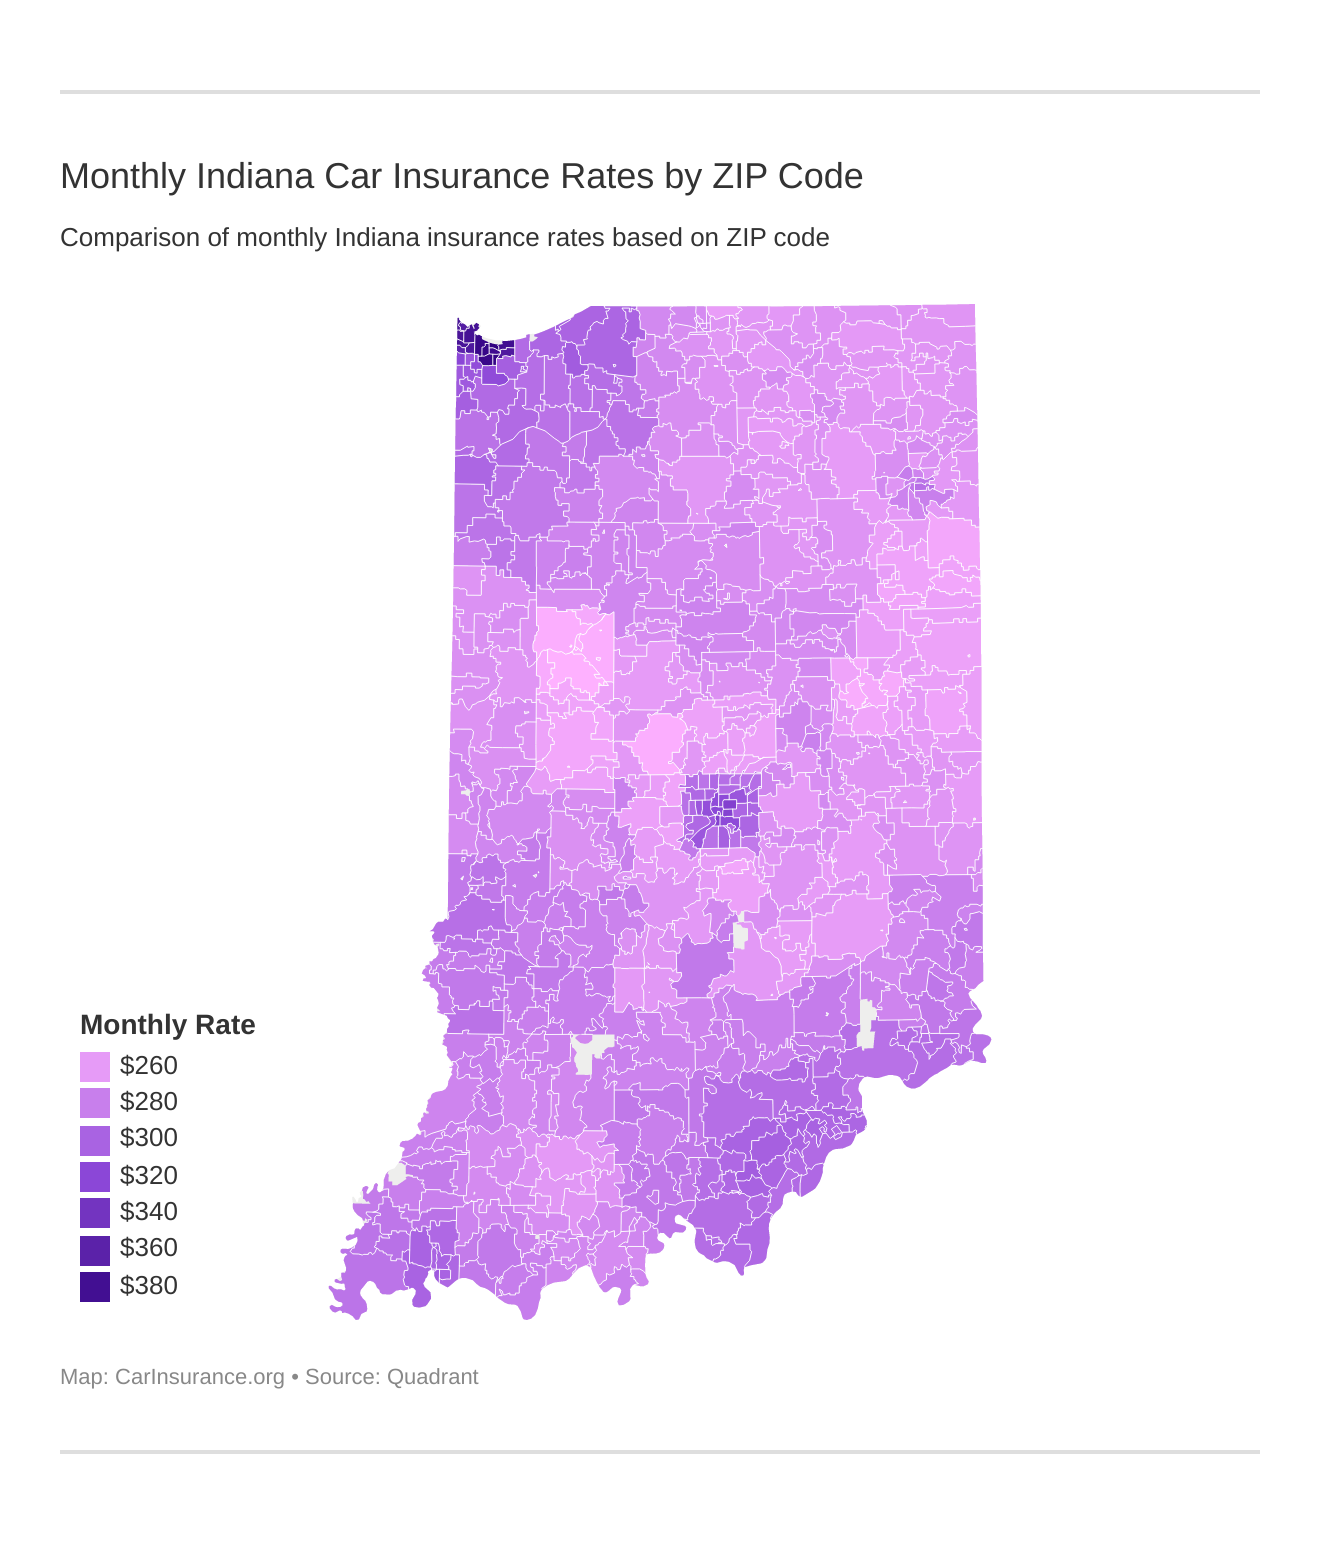 Monthly Indiana Car Insurance Rates by ZIP Code